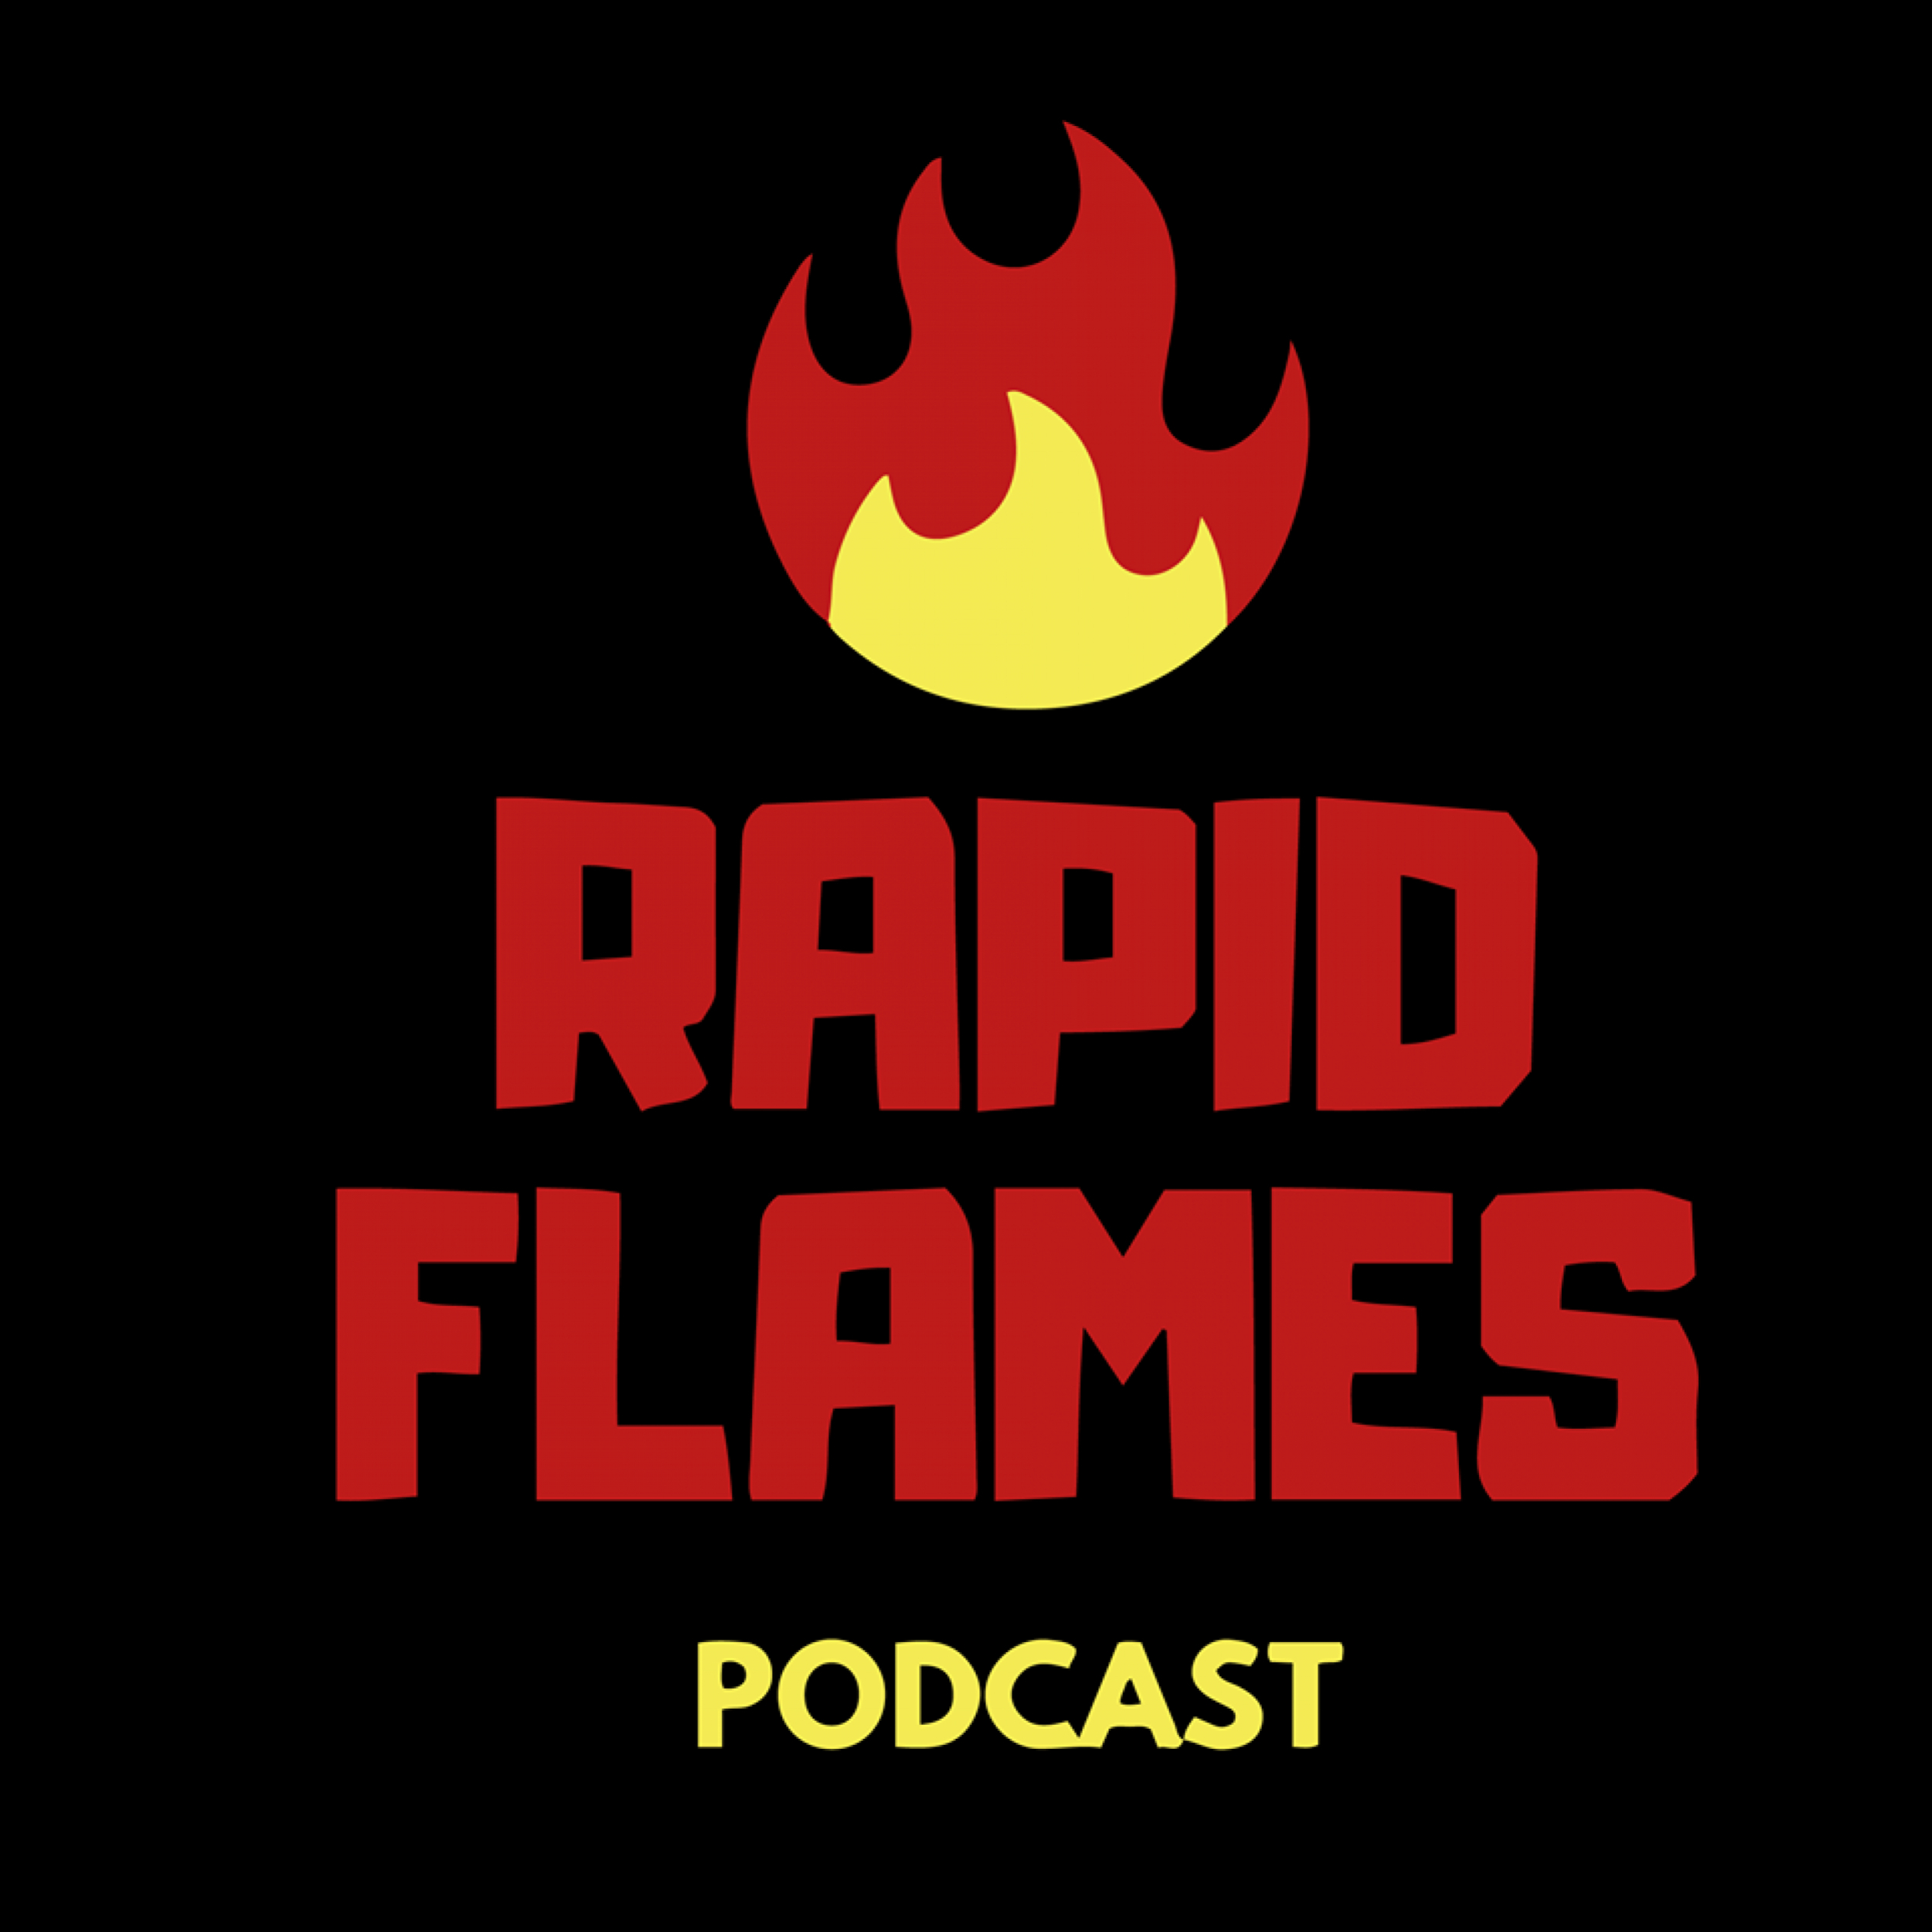 Rapid Flames Podcast